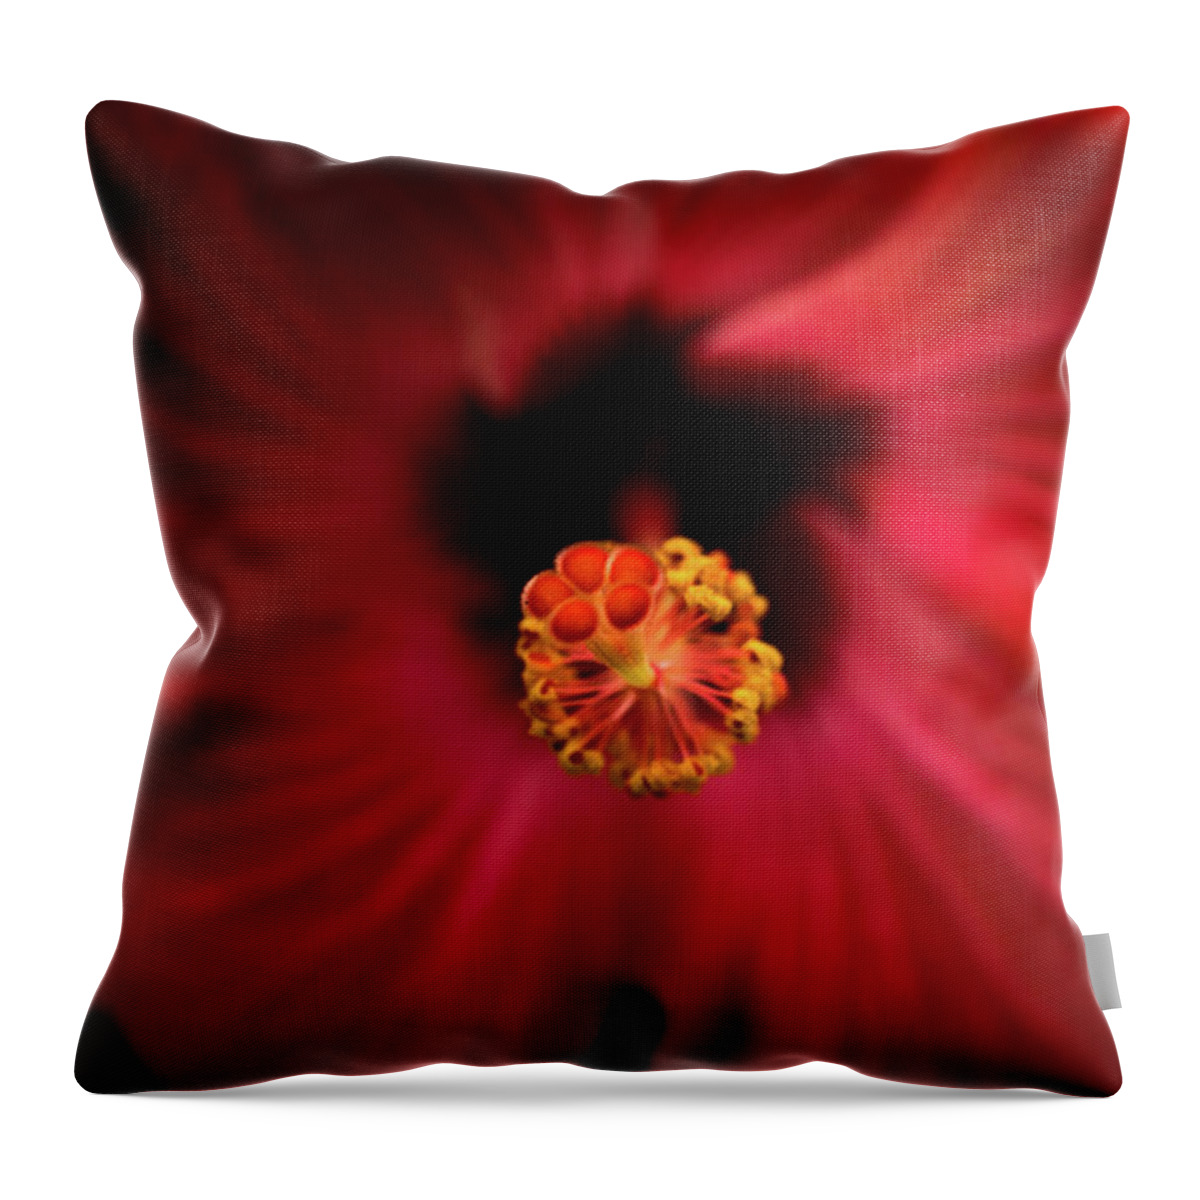 Jay Stockhaus Throw Pillow featuring the photograph Hibiscus by Jay Stockhaus